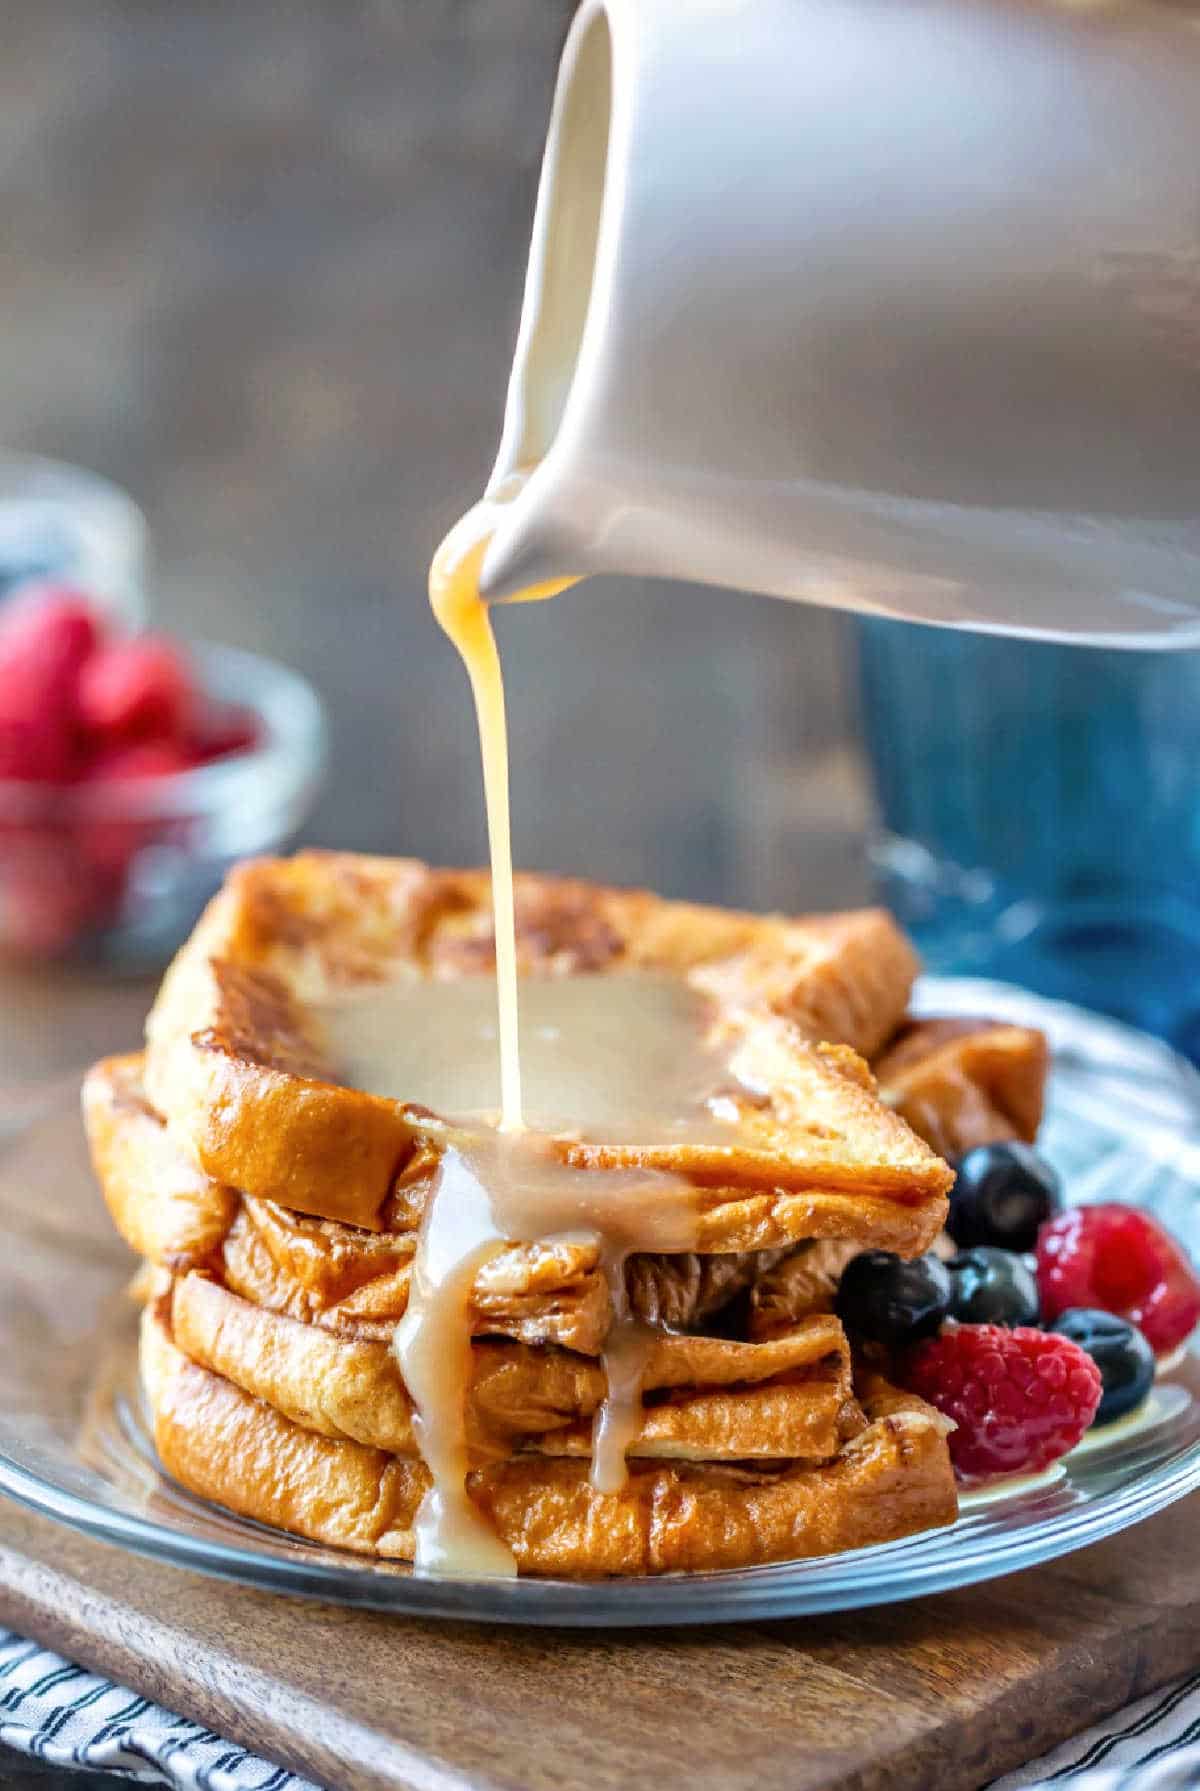 Buttermilk syrup pouring onto a stack of French toast.